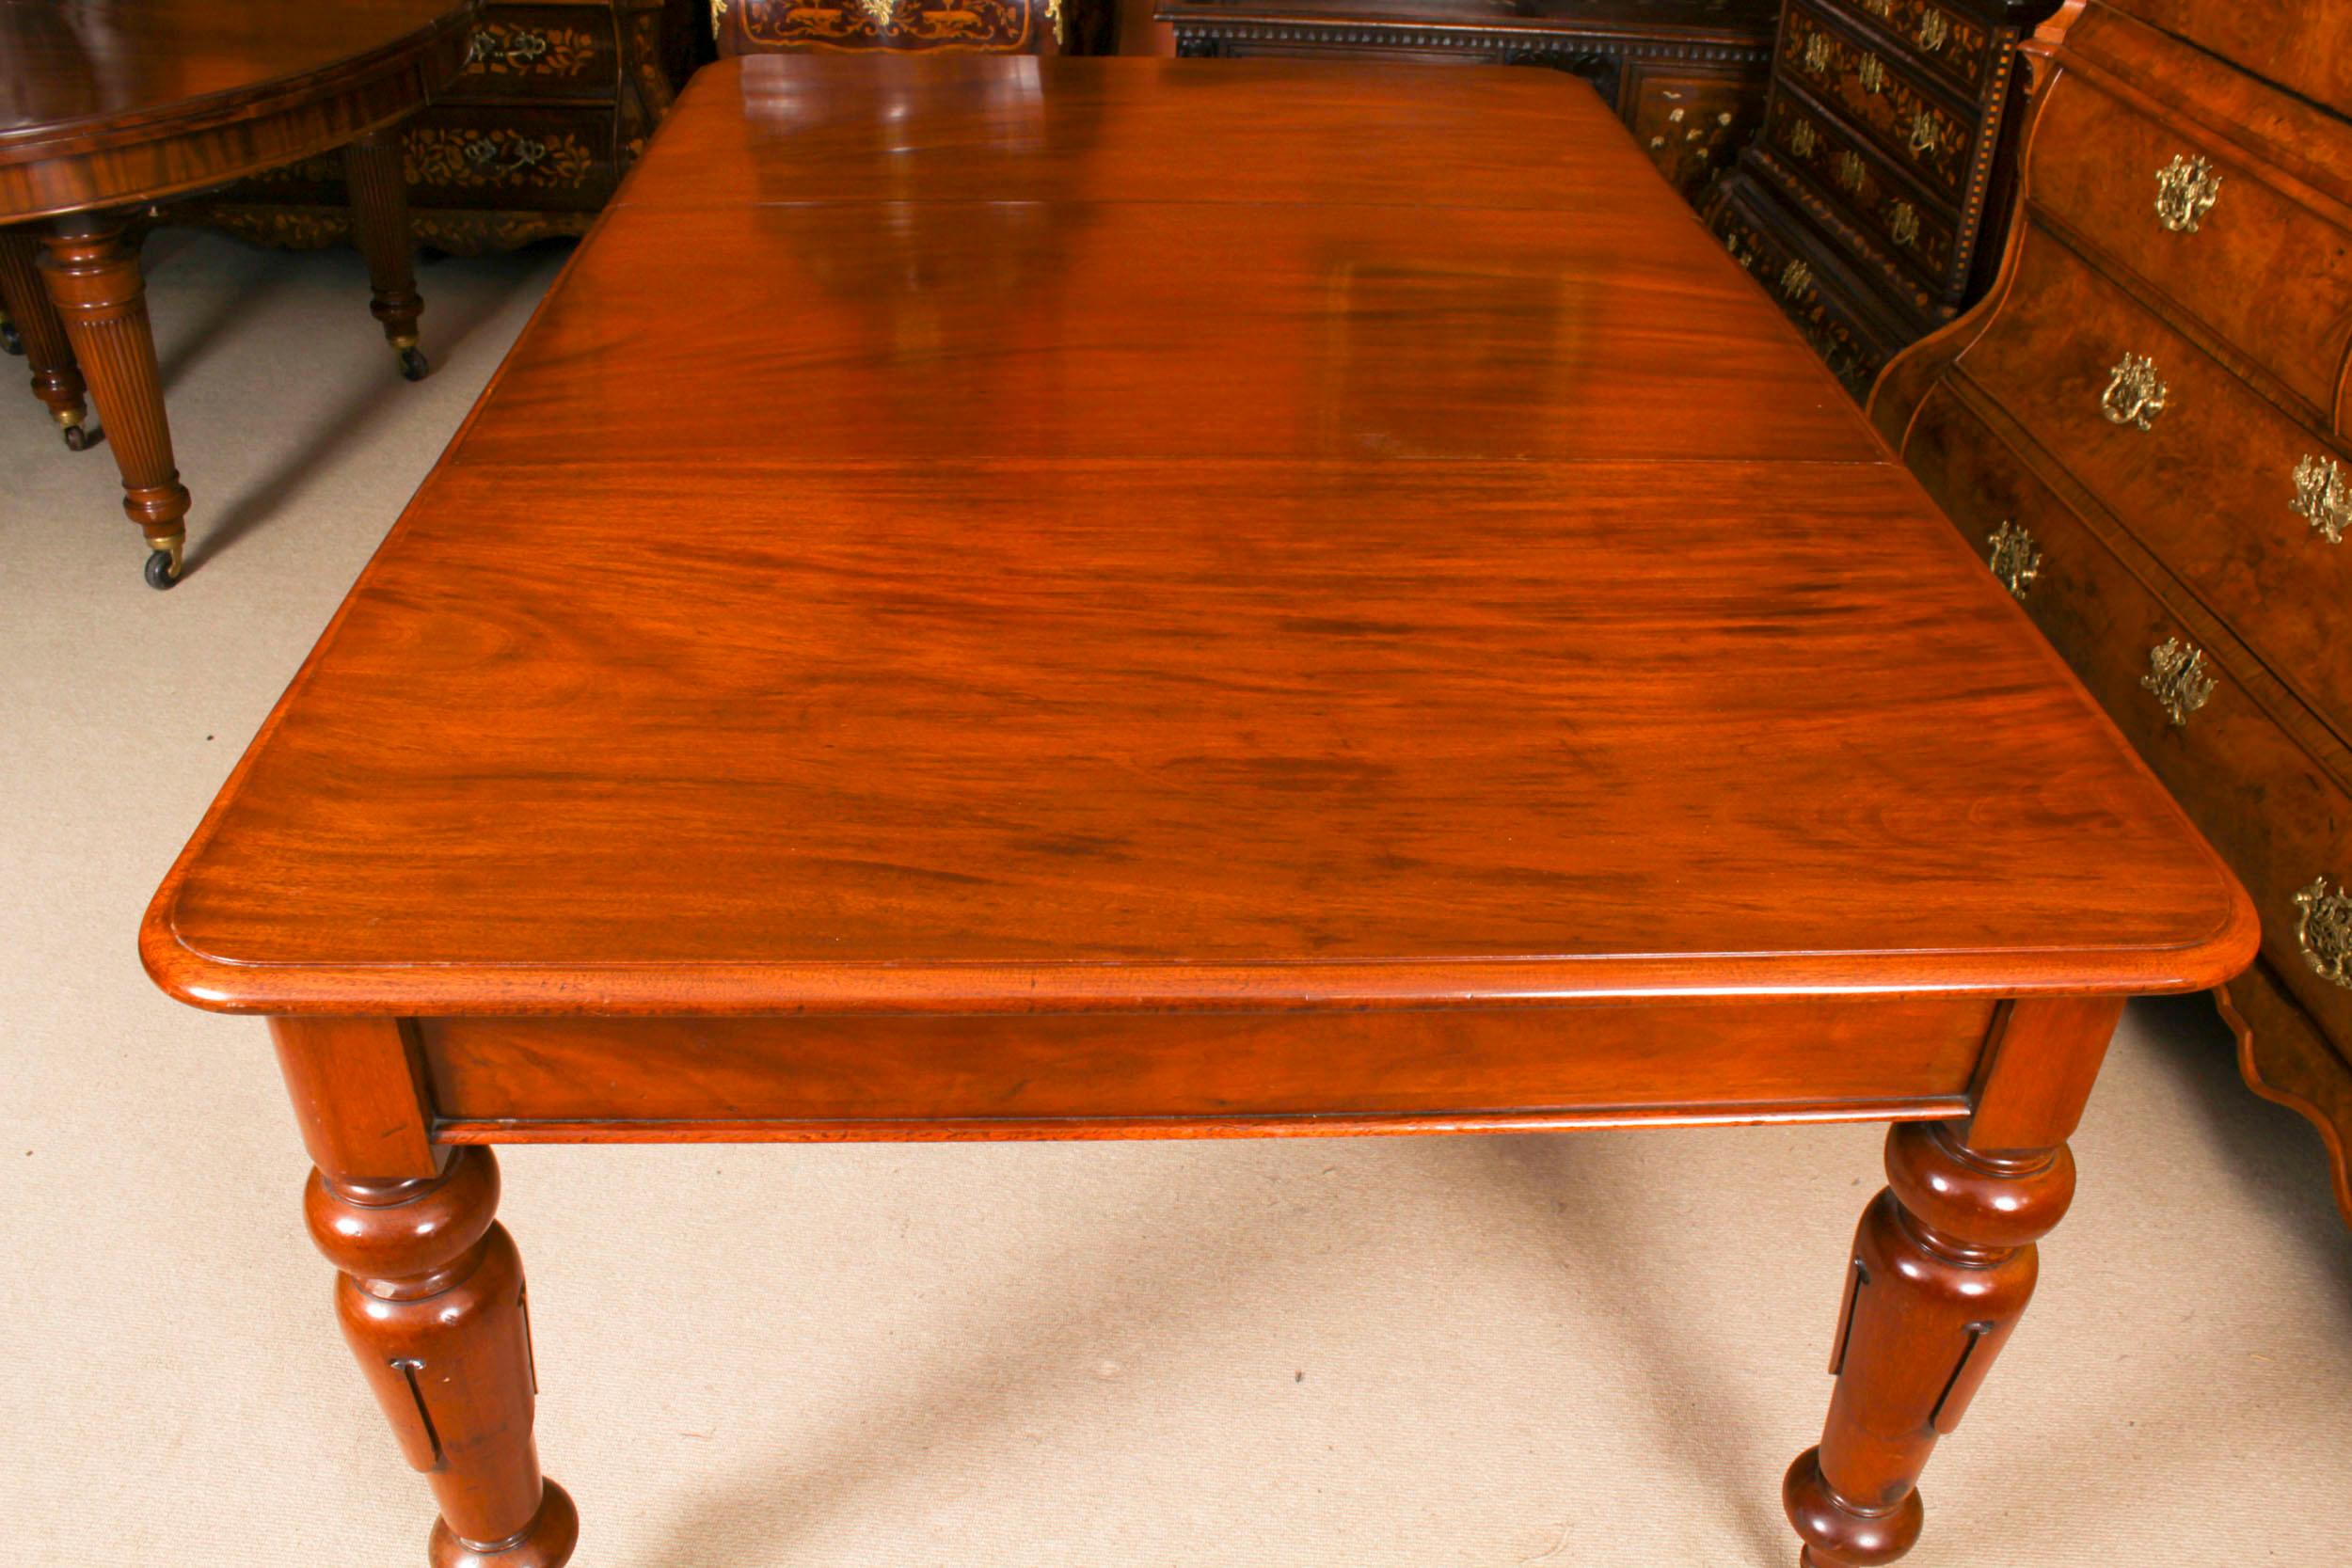 Antique William IV Flame Mahogany Extending Dining Table 19th Century 1